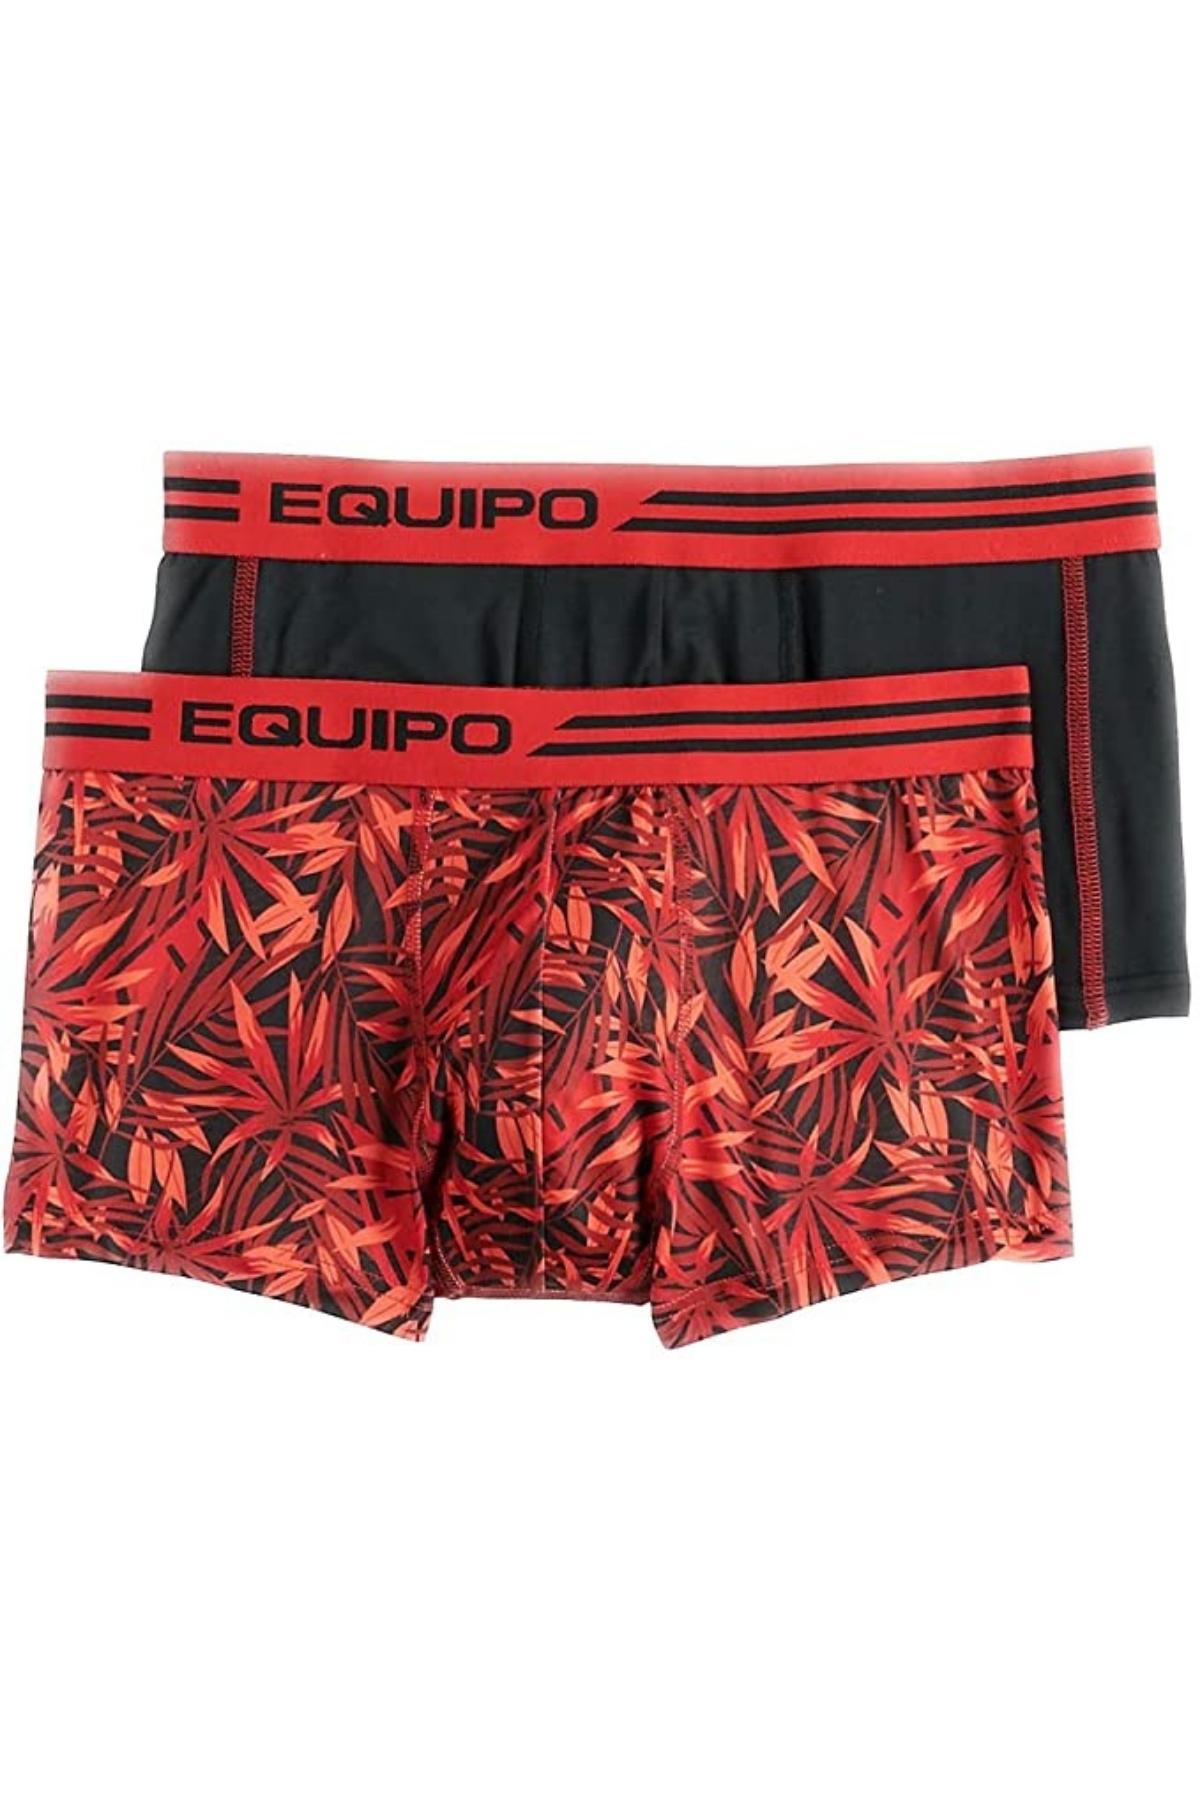 Equipo Red and Leaves Quick Dry Performace 2-Pack Trunks